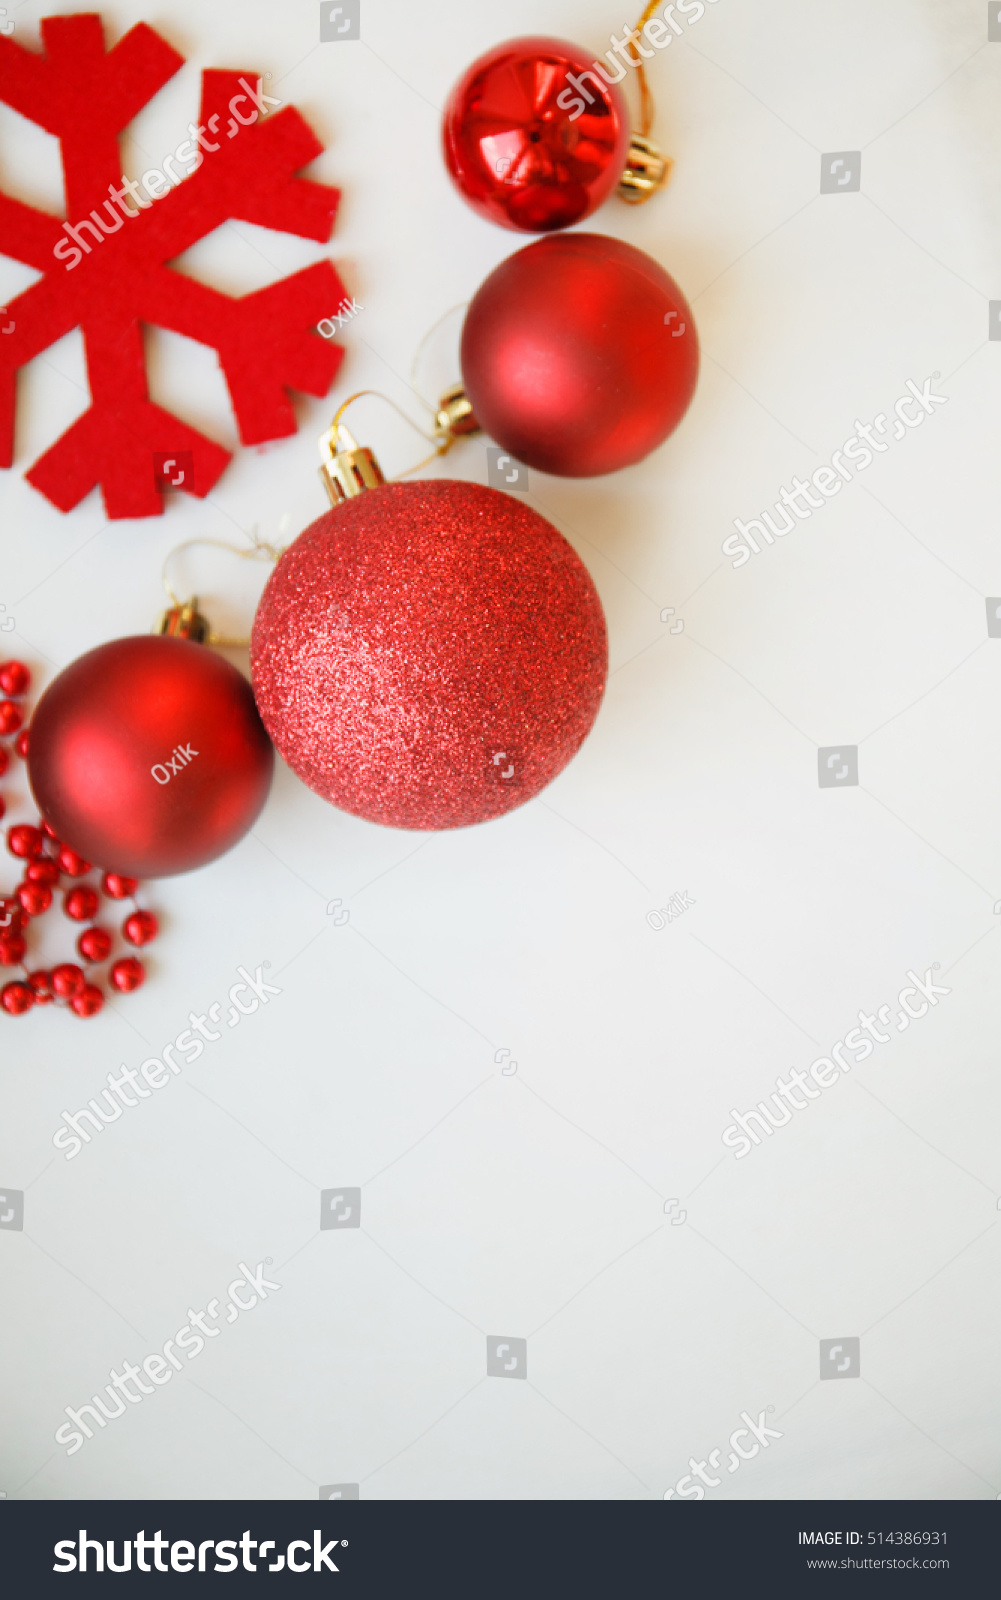 red christmas balls, decorations, red beards and red snowflake on white background, top view, selective focus #514386931